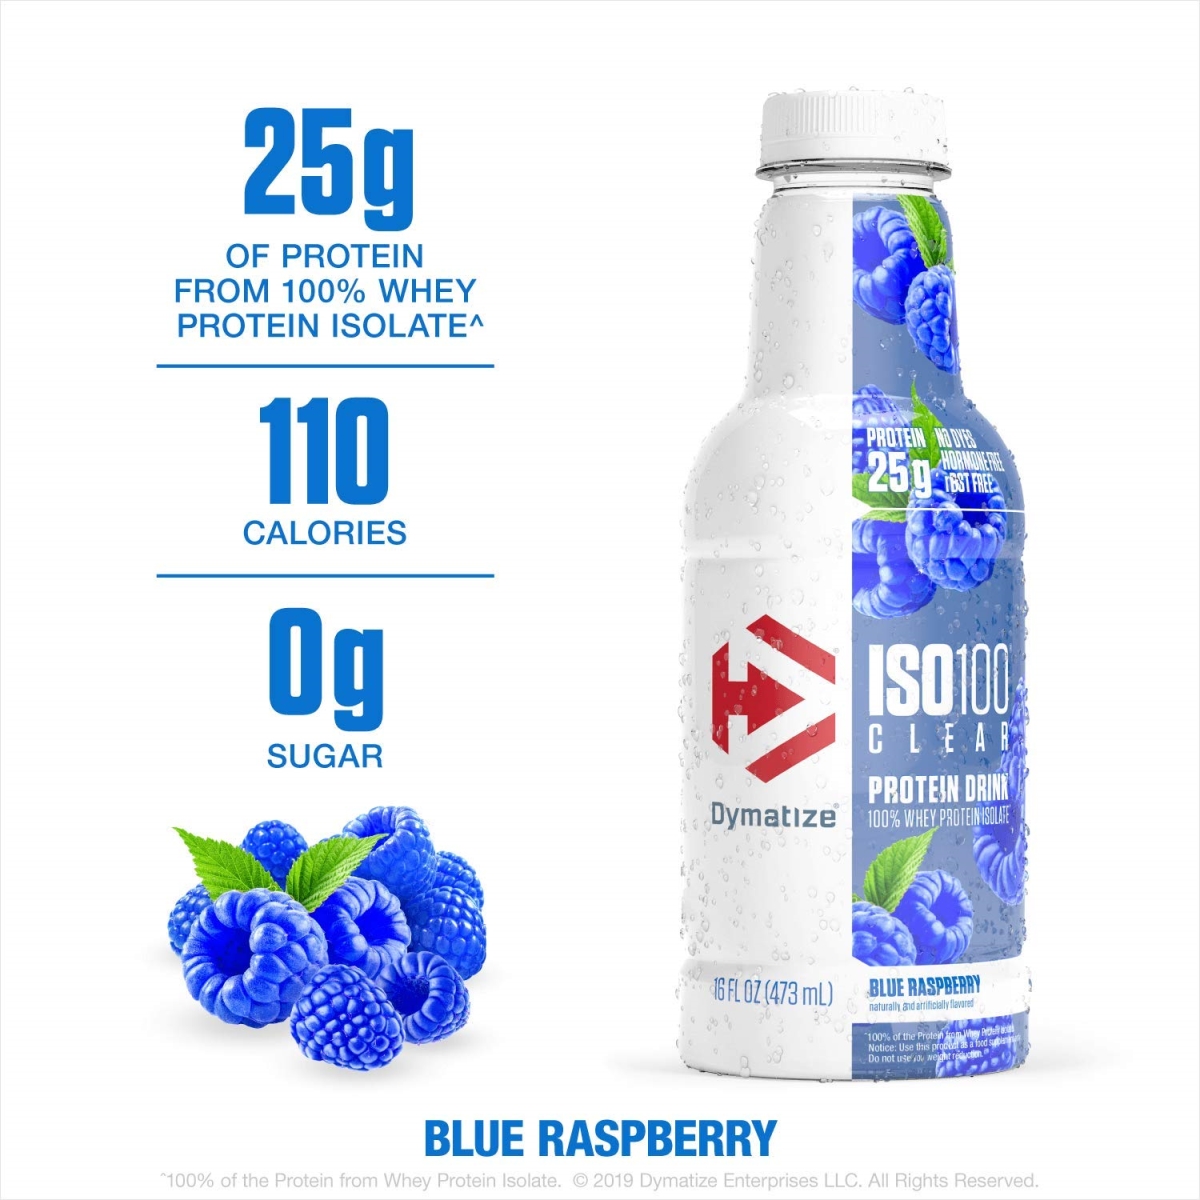 2060805 Iso-100 Clear Whey Protein Isolate Drinks, Blue Raspberry - 16 Oz - 12 Per Case